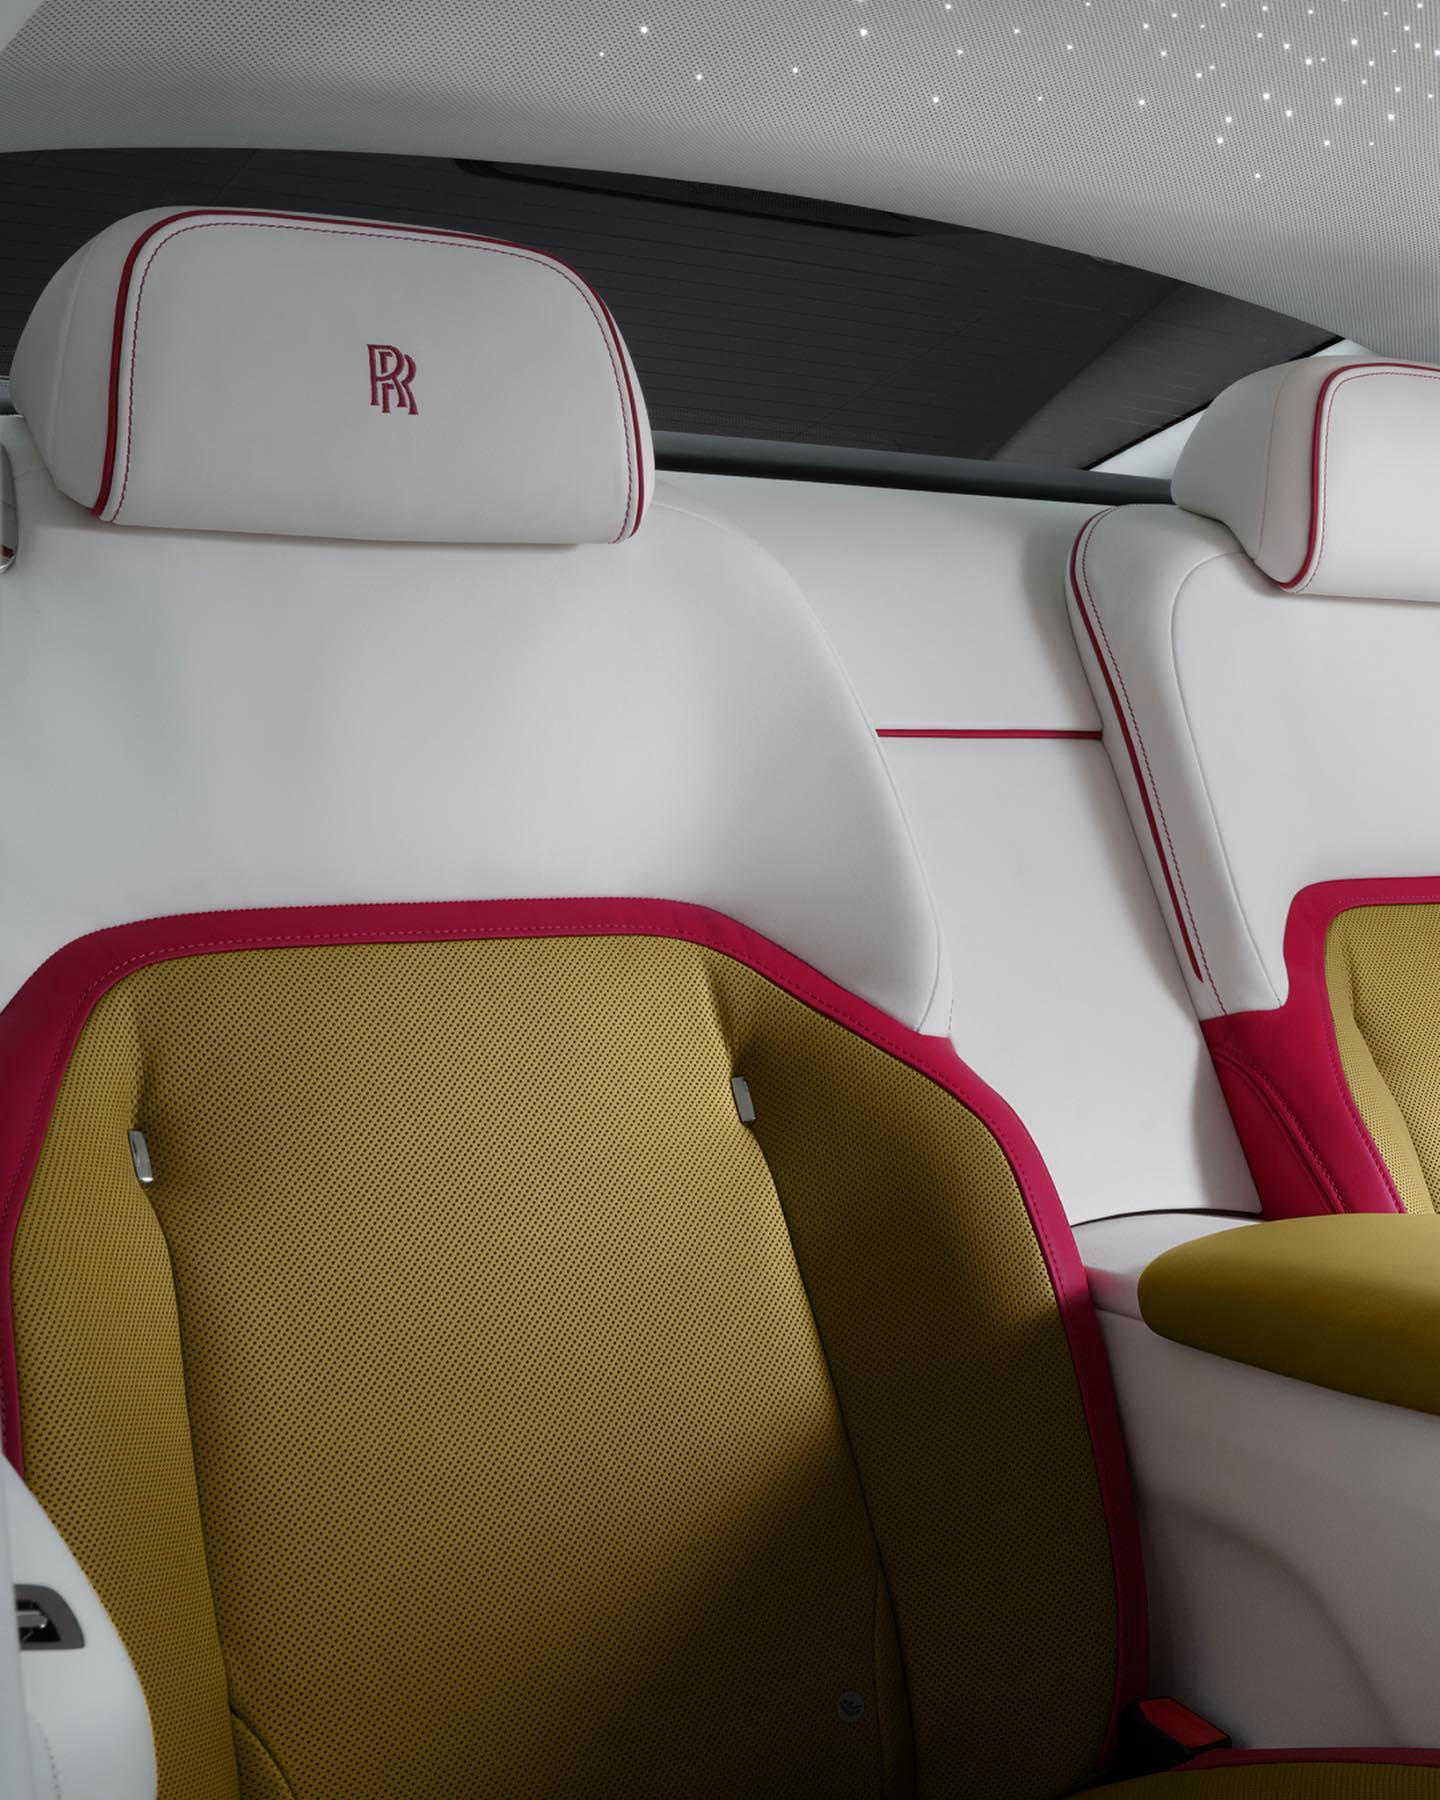 image  1 Rolls-Royce Motor Cars - Spectre's continuous rear seat wraps itself around the passenger, cocooning